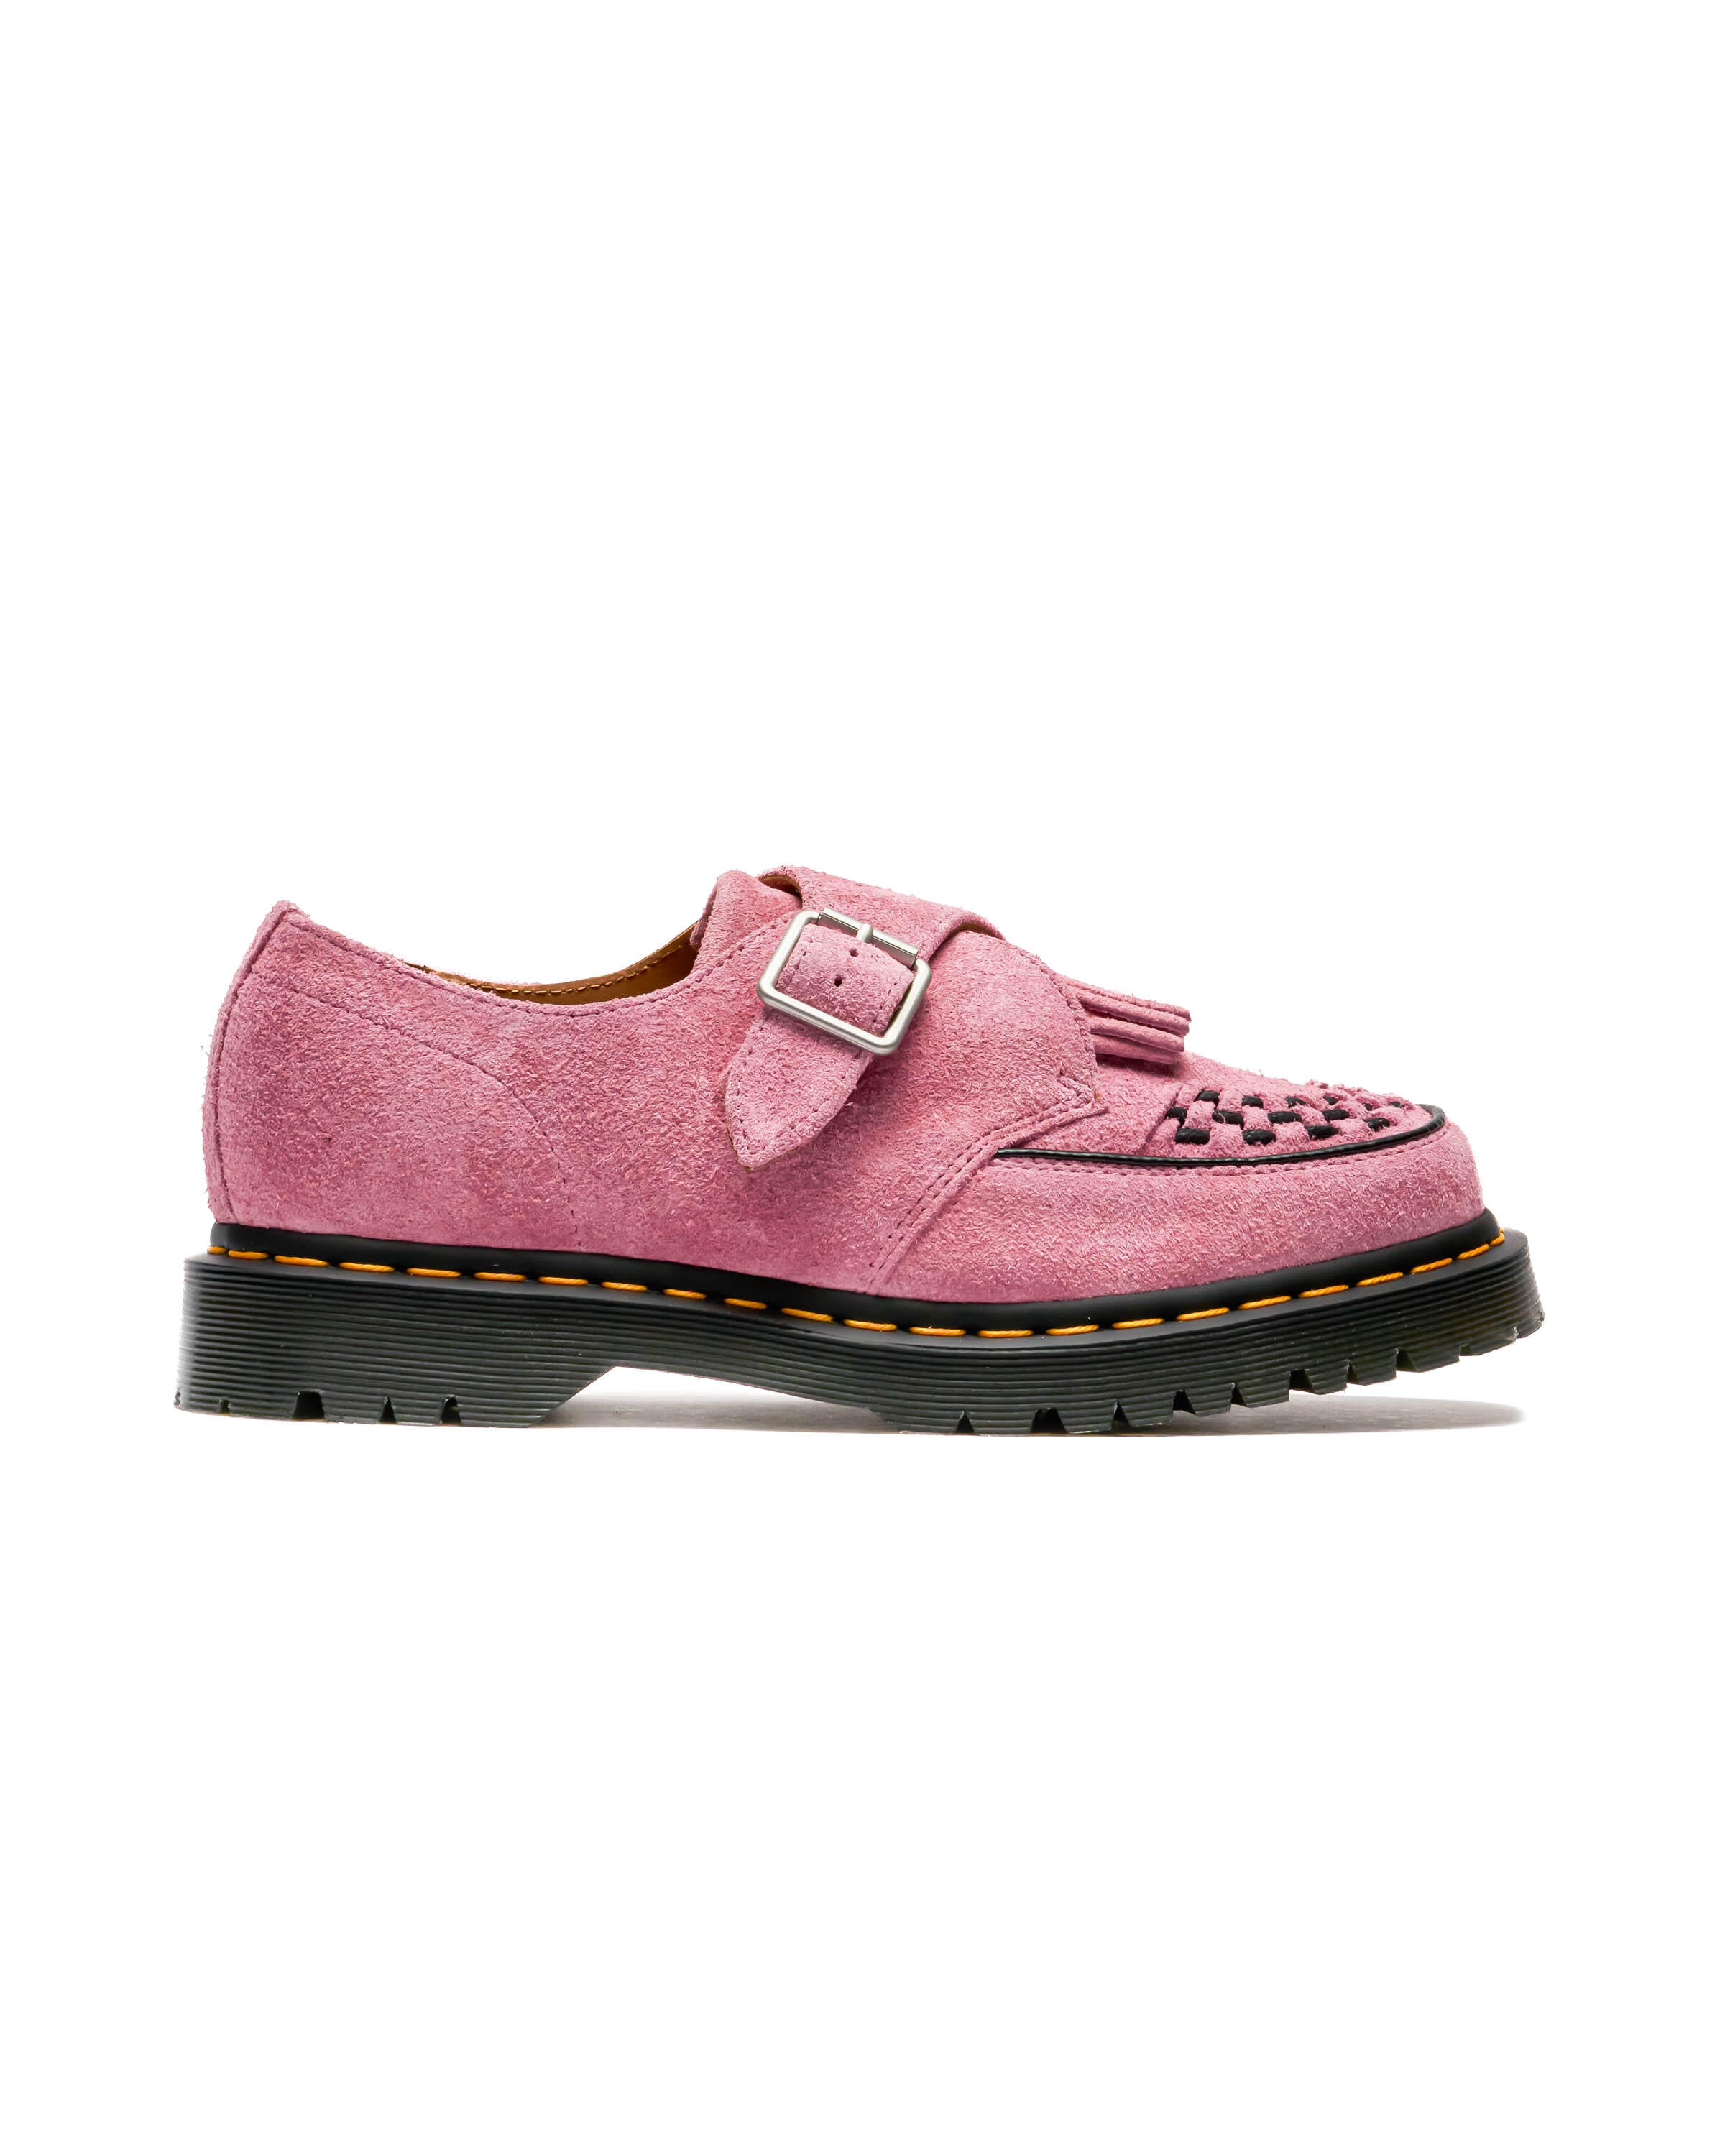 Dr. Martens | Sneakers & Apparel | AFEW STORE